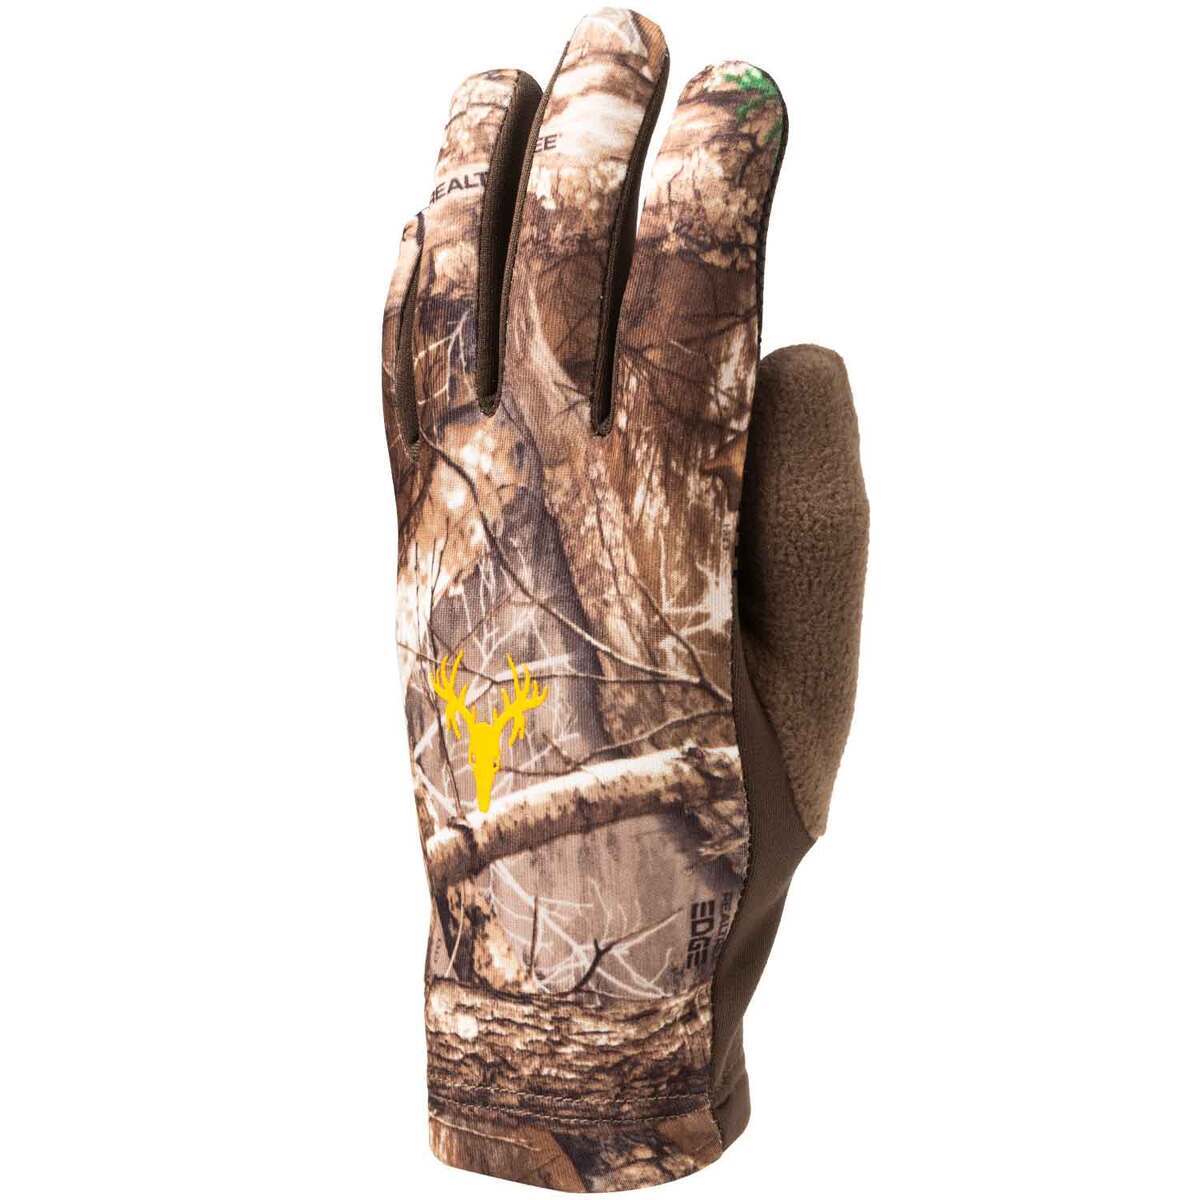 Hot Shot Youth Realtree Edge Stretch Fleece Hunting Glove - One